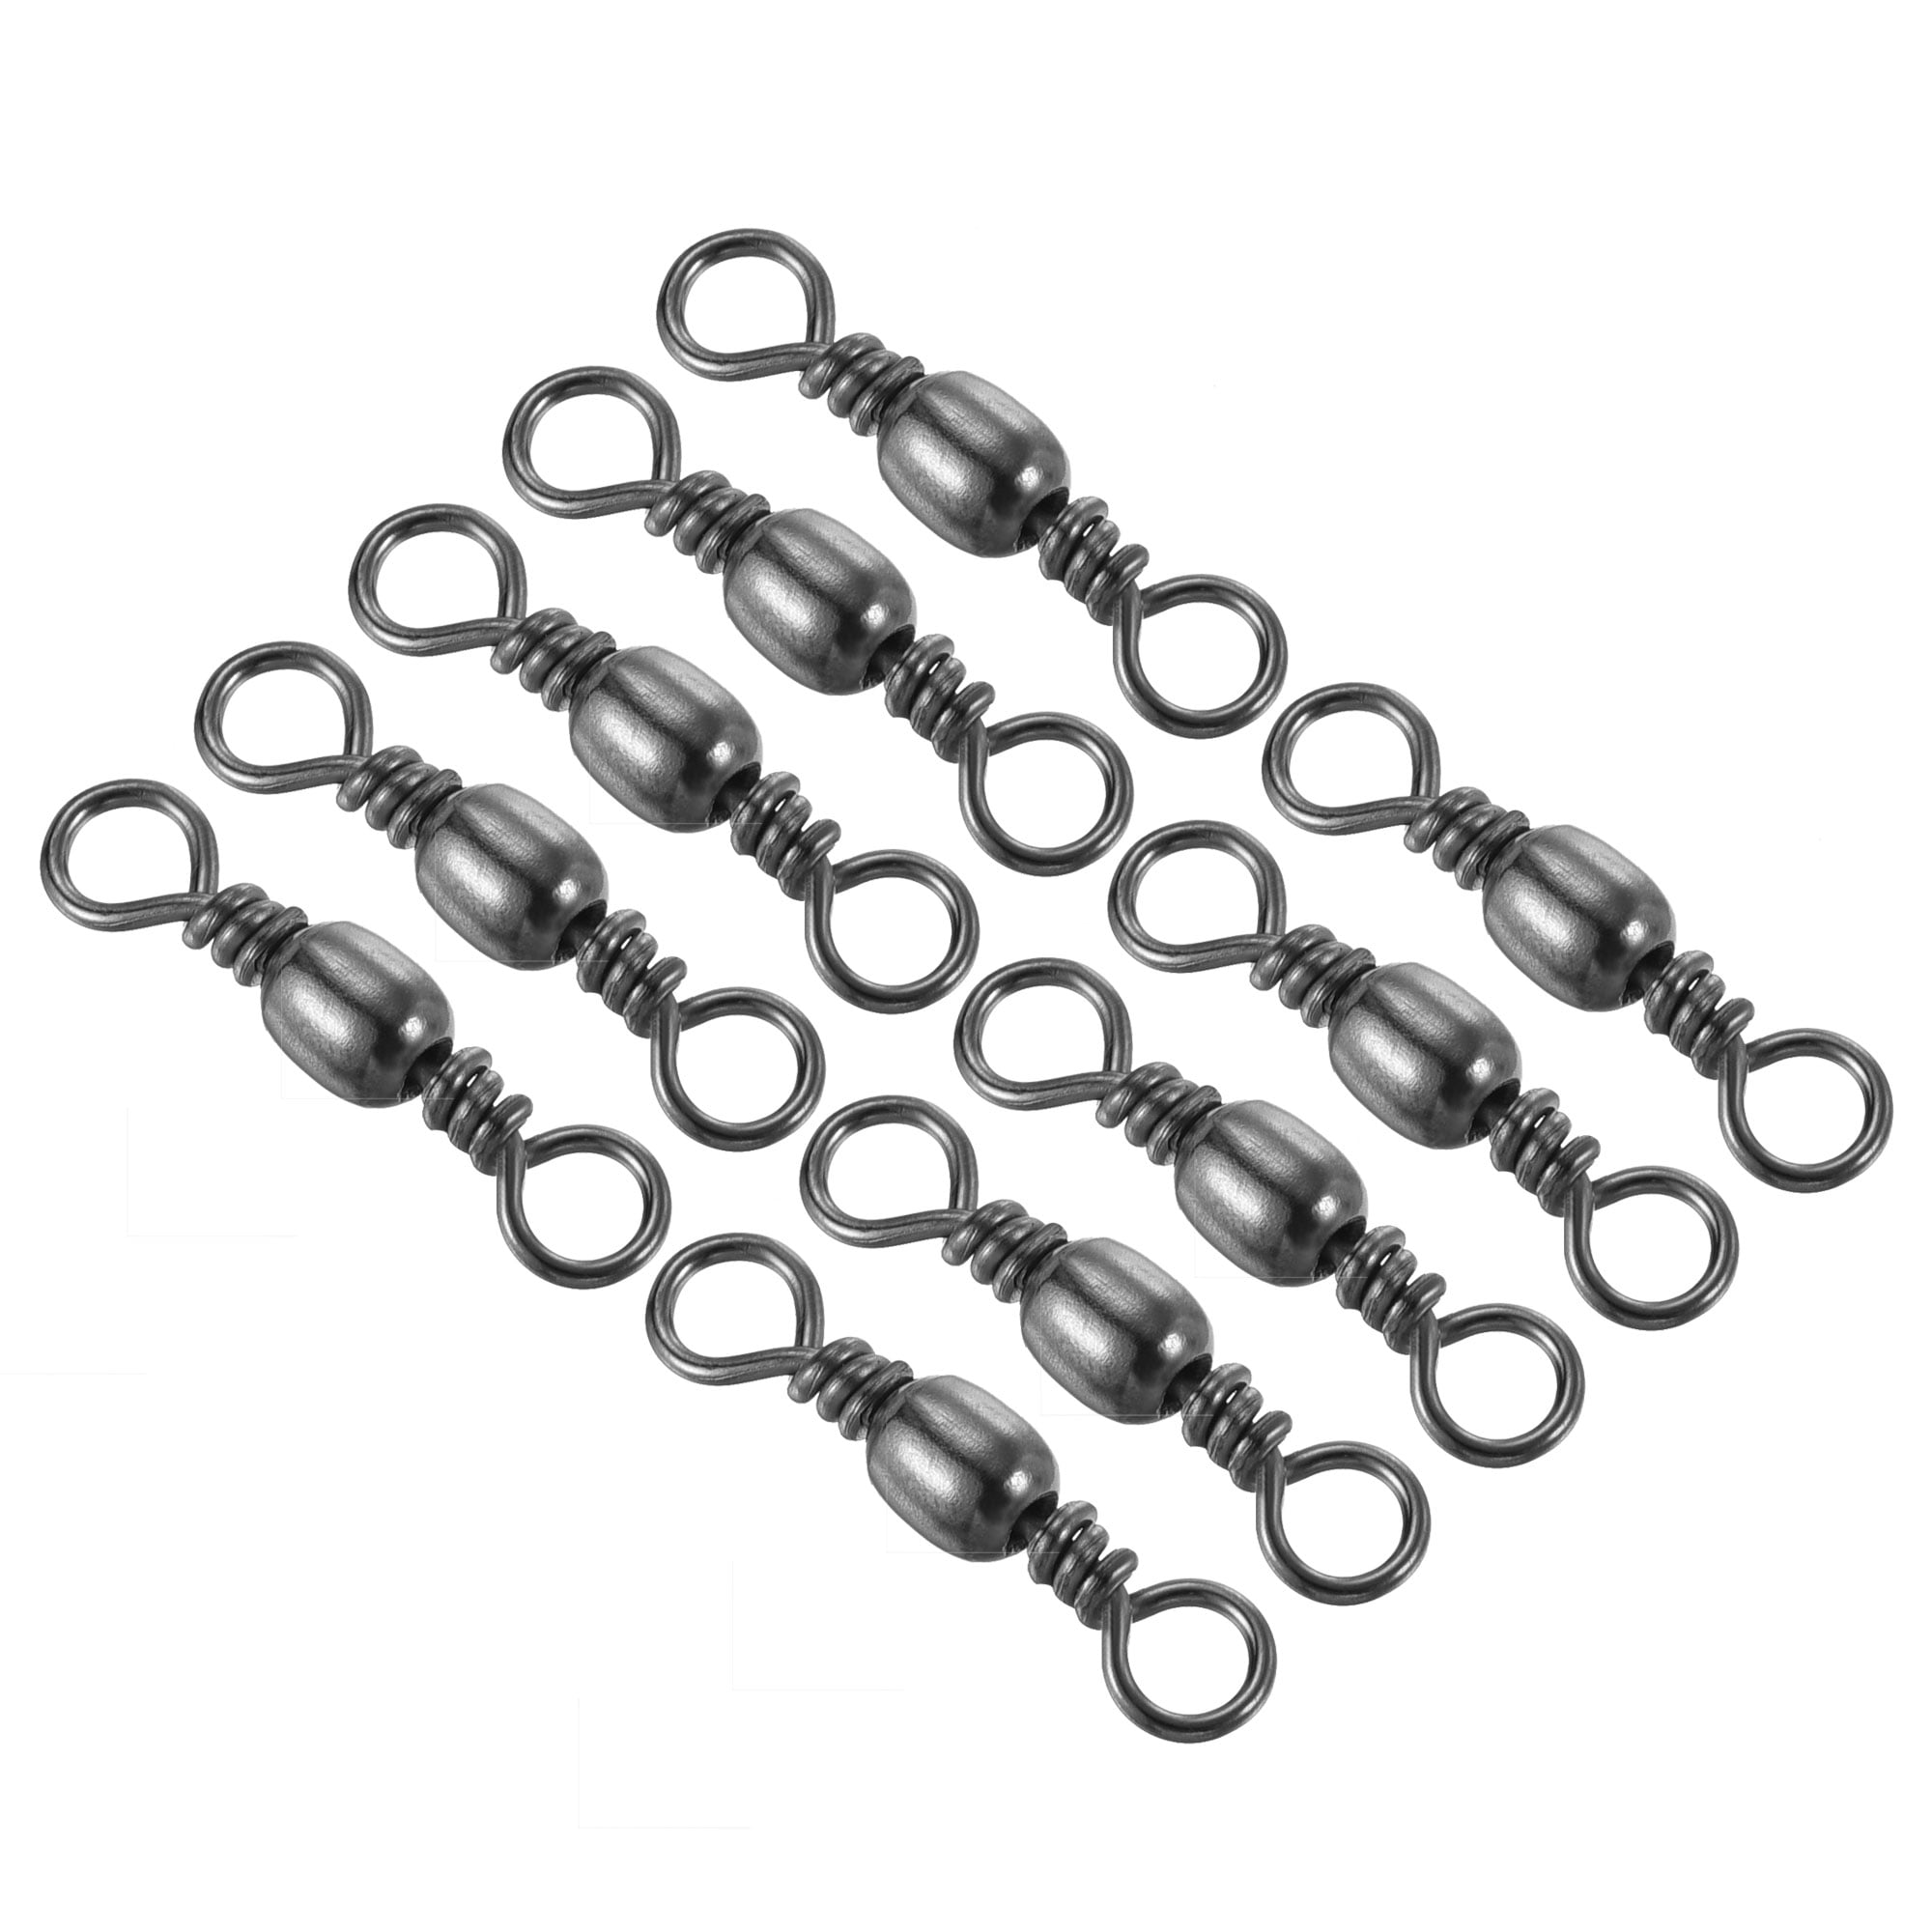 Uxcell 99LBS Stainless Steel Fishing Barrel Swivels, Black 50 Pack